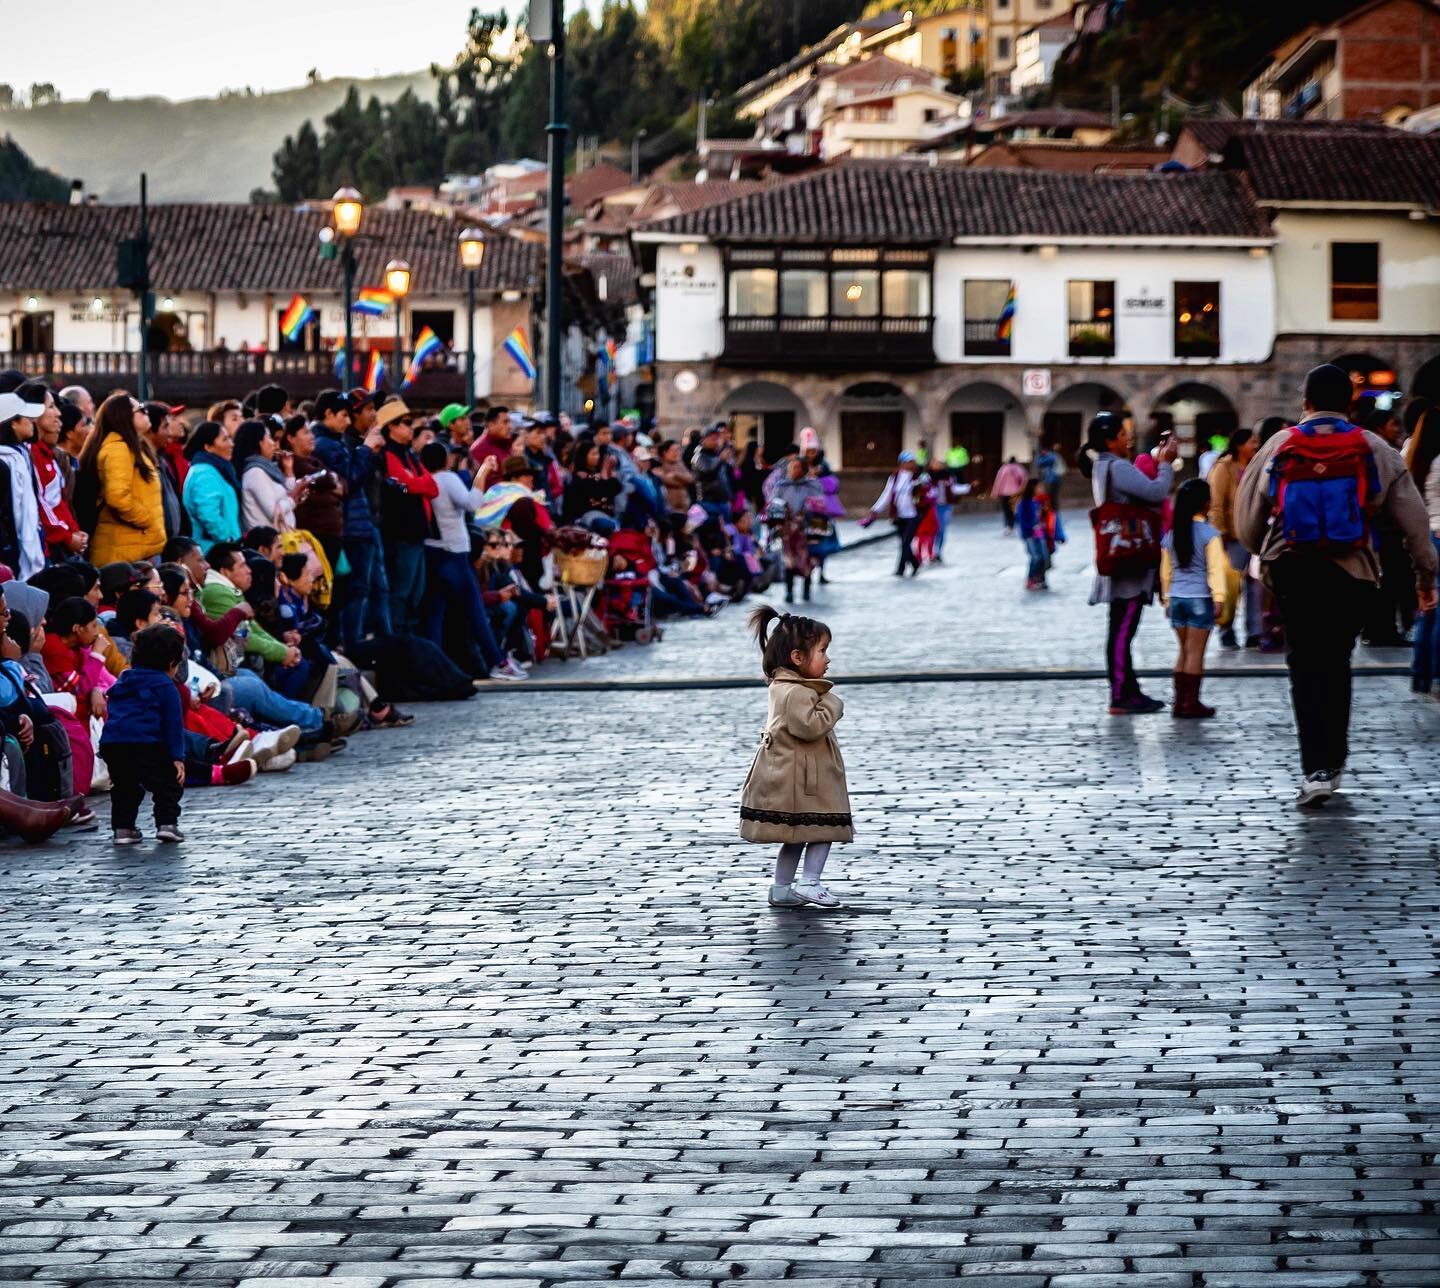 You&rsquo;ll get a better view when you don&rsquo;t have so many people in your way. 
.
.
.
.
.
.
.
.
.
#colors #picture #cusco #peru #celabration #alone #solo #stepawayfromthecrowds #unique #photooftheday #instagood #travel #travelphotography #aroun